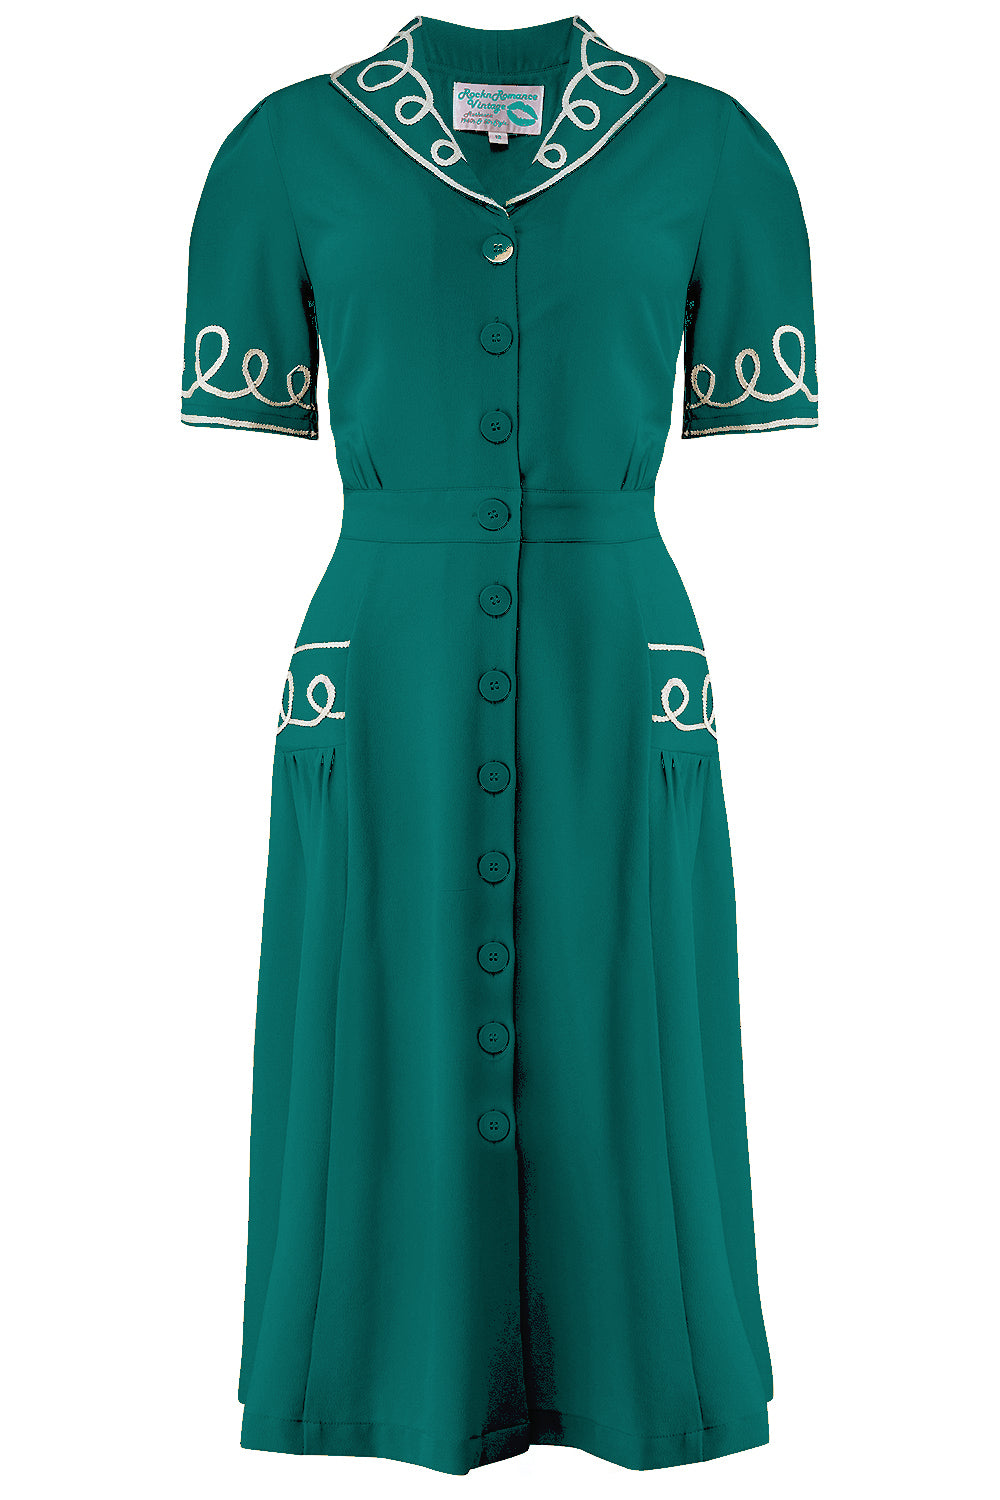 1940s Fashion Advice for Tall Women The Loopy-Lou Shirtwaister Dress in Teal with Contrast RicRac True 1950s Vintage Style £49.95 AT vintagedancer.com